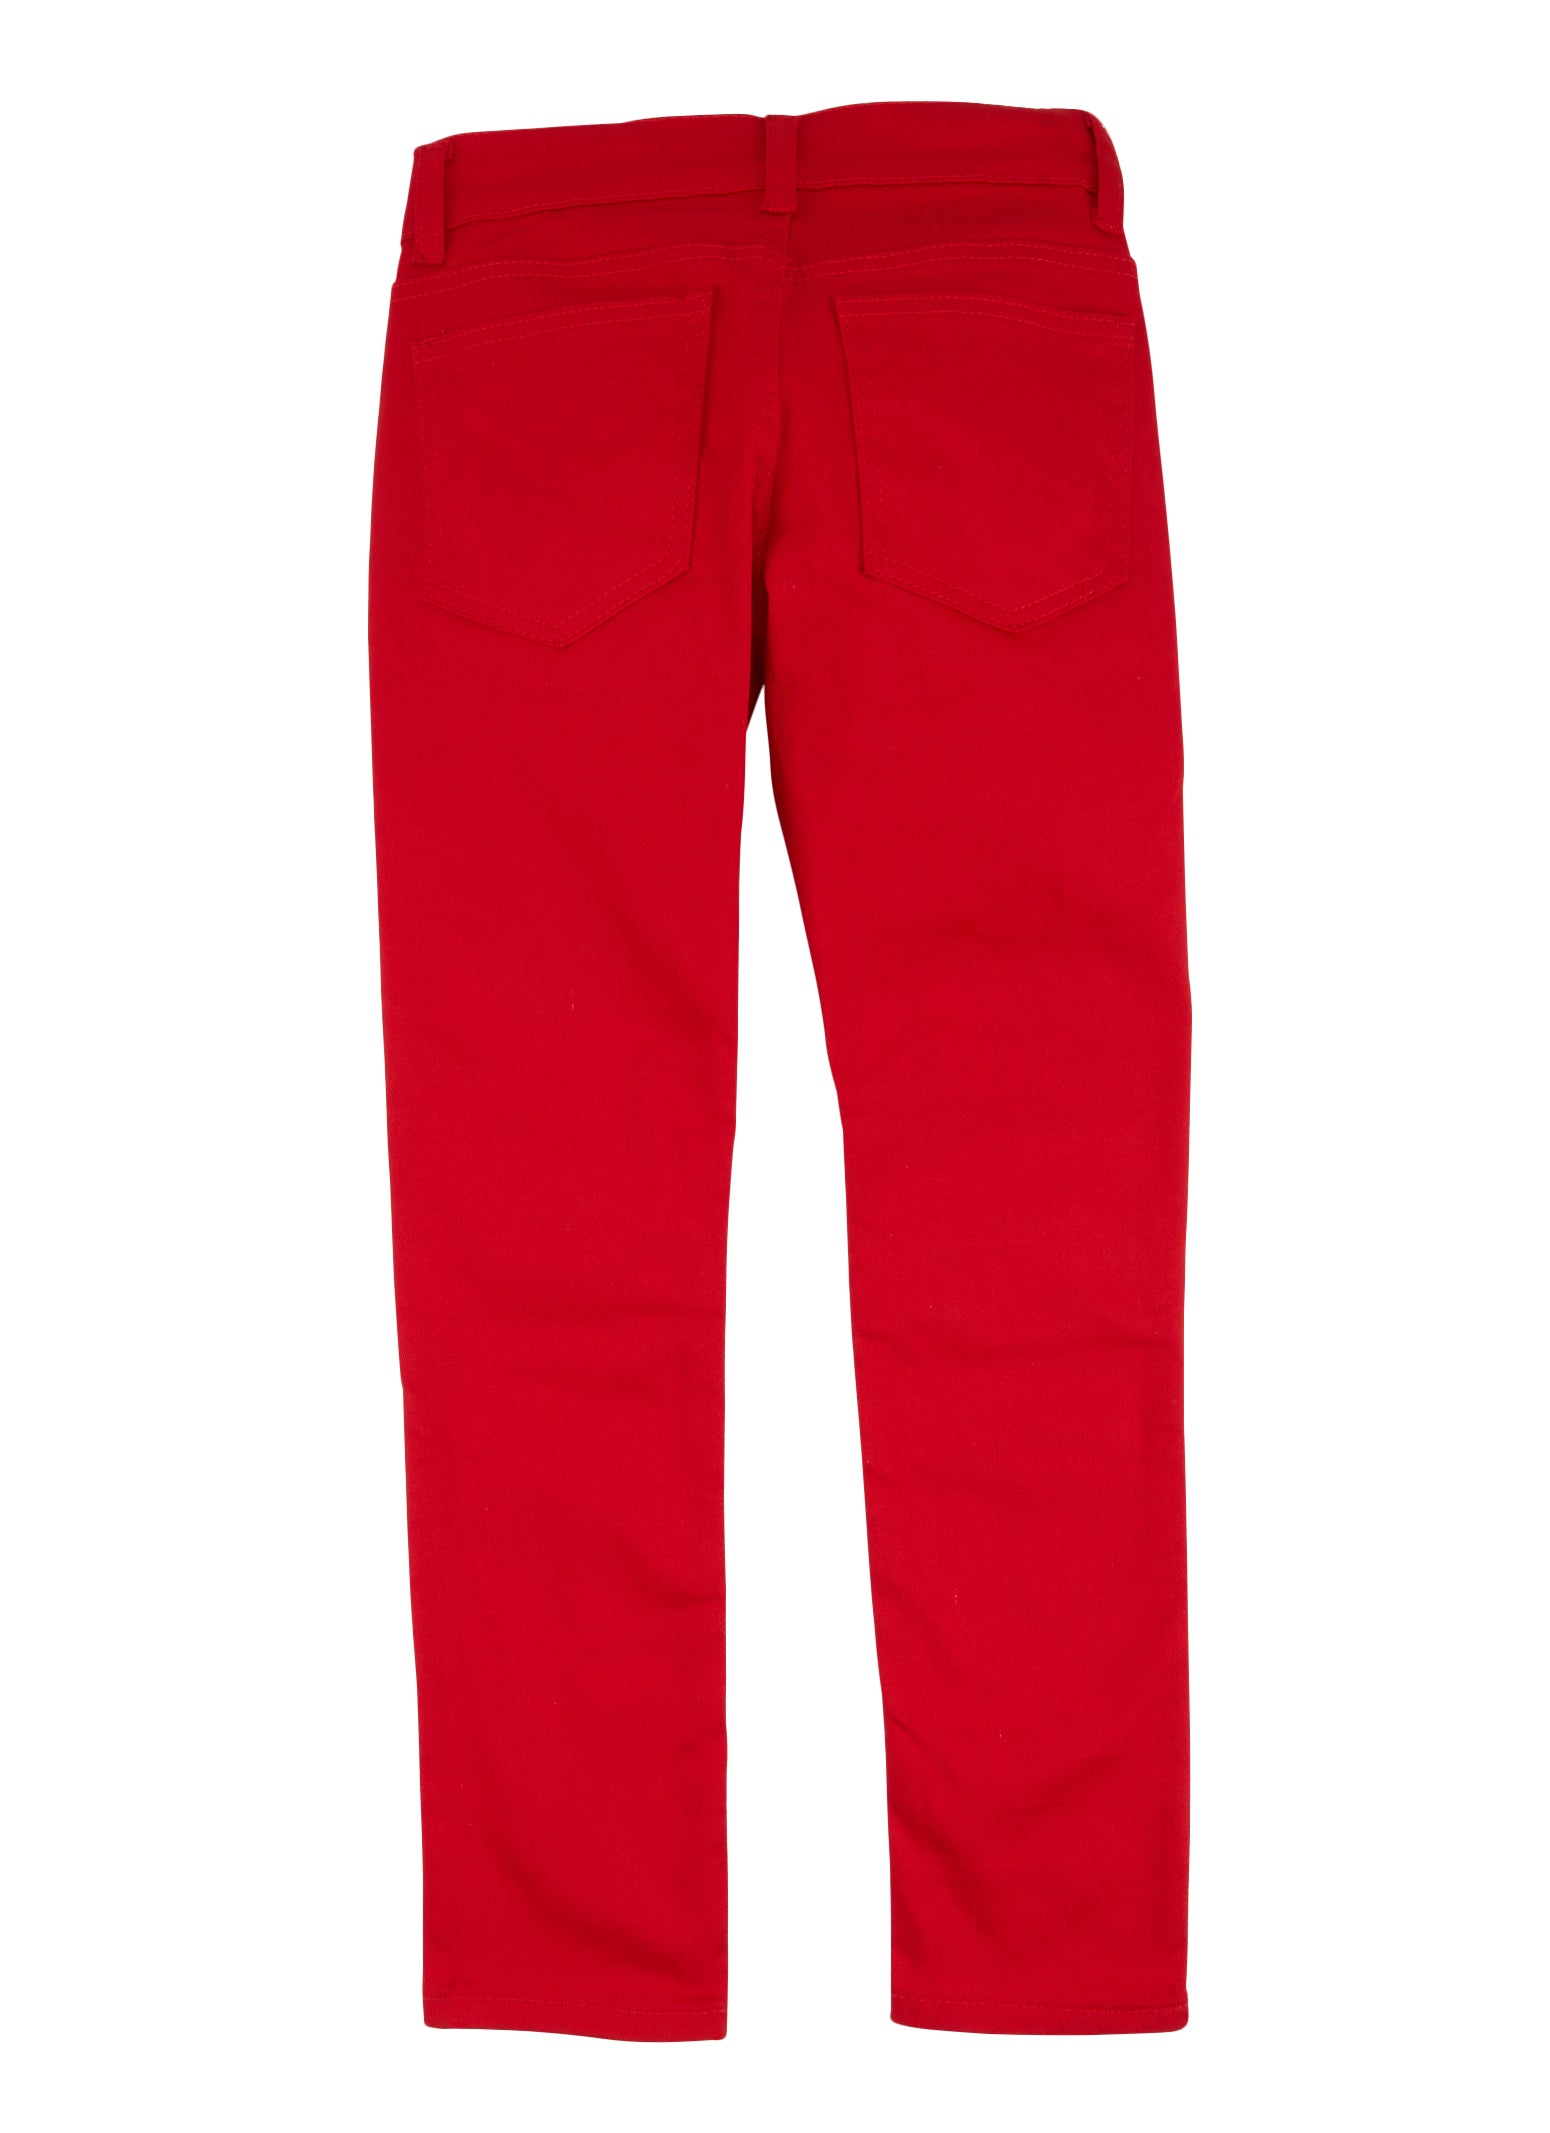 Boys Zipper Detail Patch and Repair Skinny Moto Jeans - Red